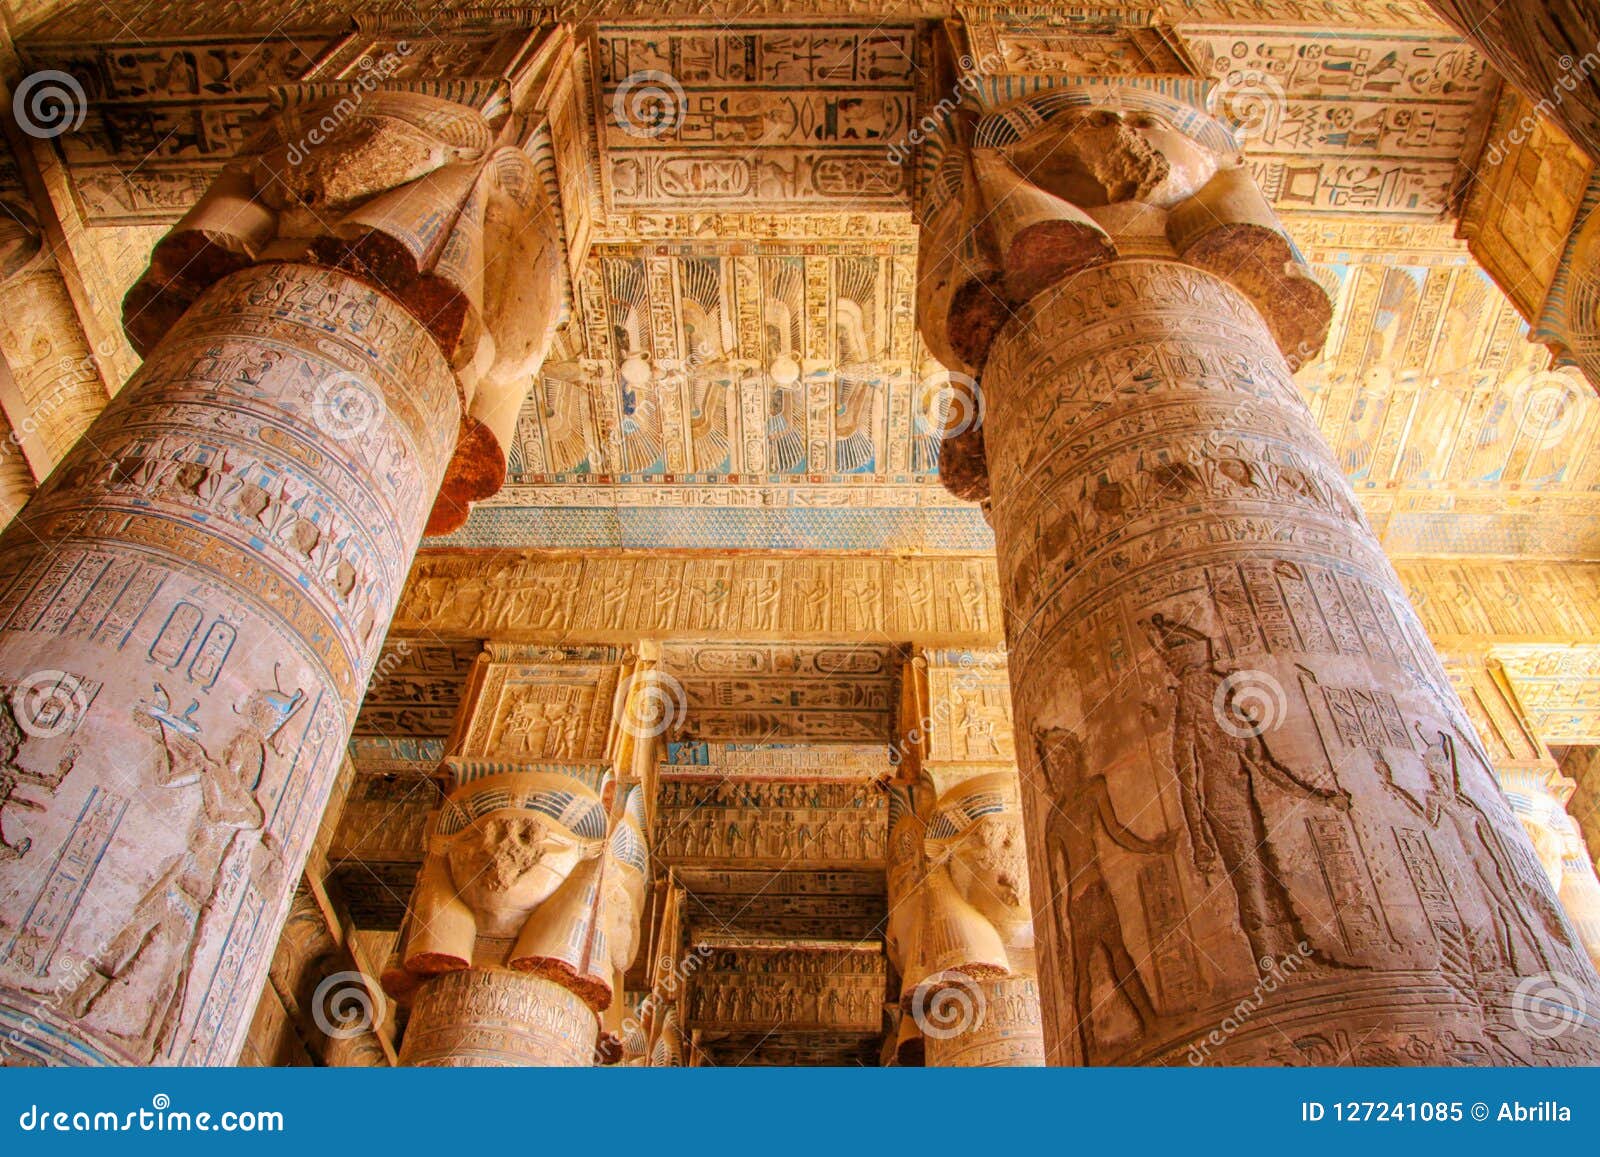 beautiful interior of the temple of dendera or the temple of hathor. colorful zodiac on the ceiling of the ancient